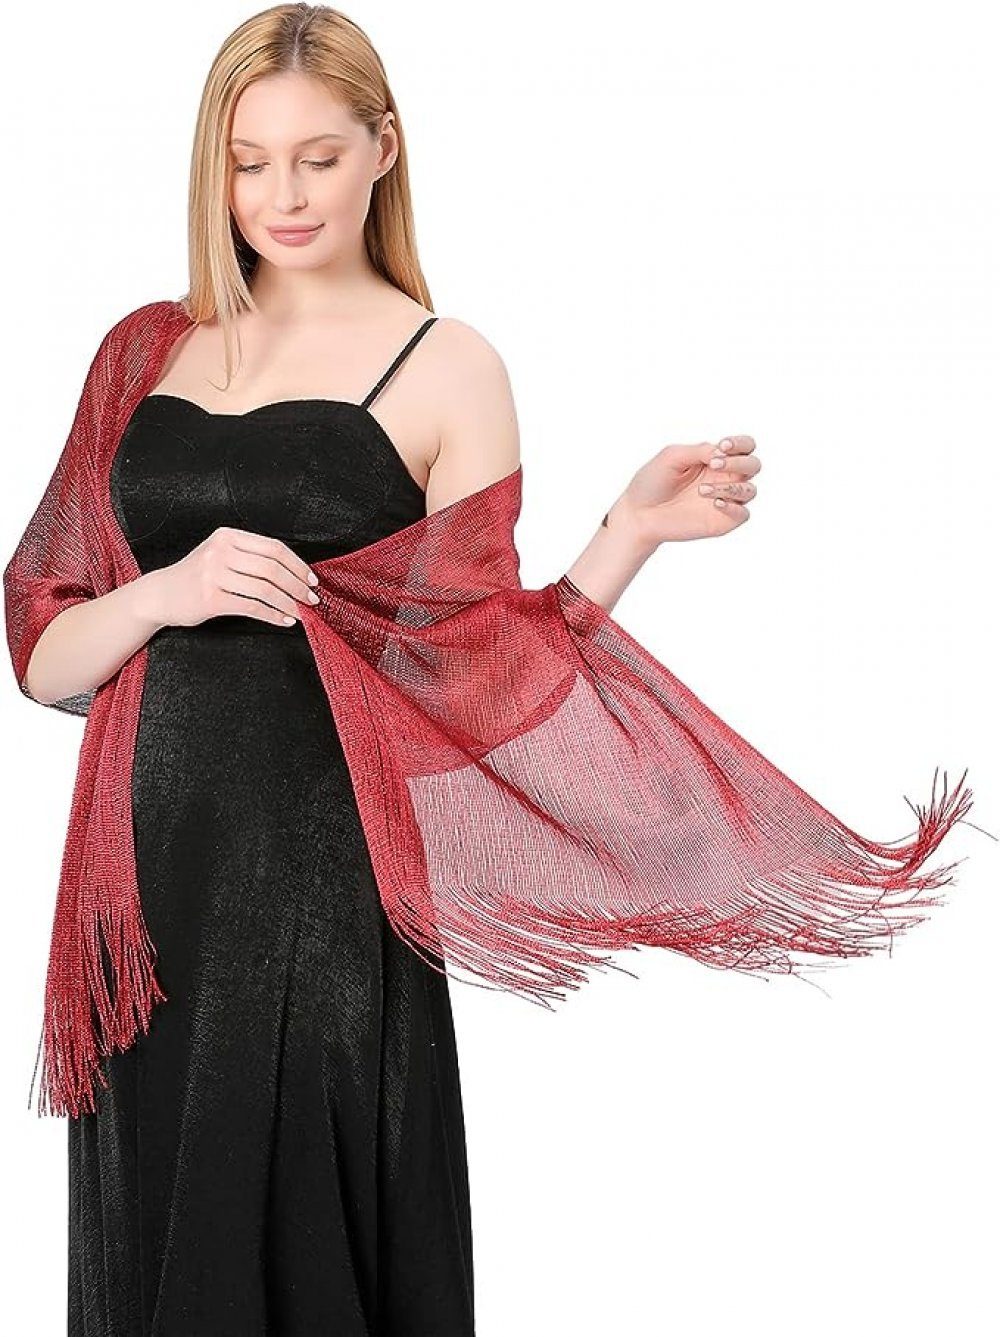 WaKuKa Schal Holiday metal buckle shawl suitable for sparkling evening parties Purplishred